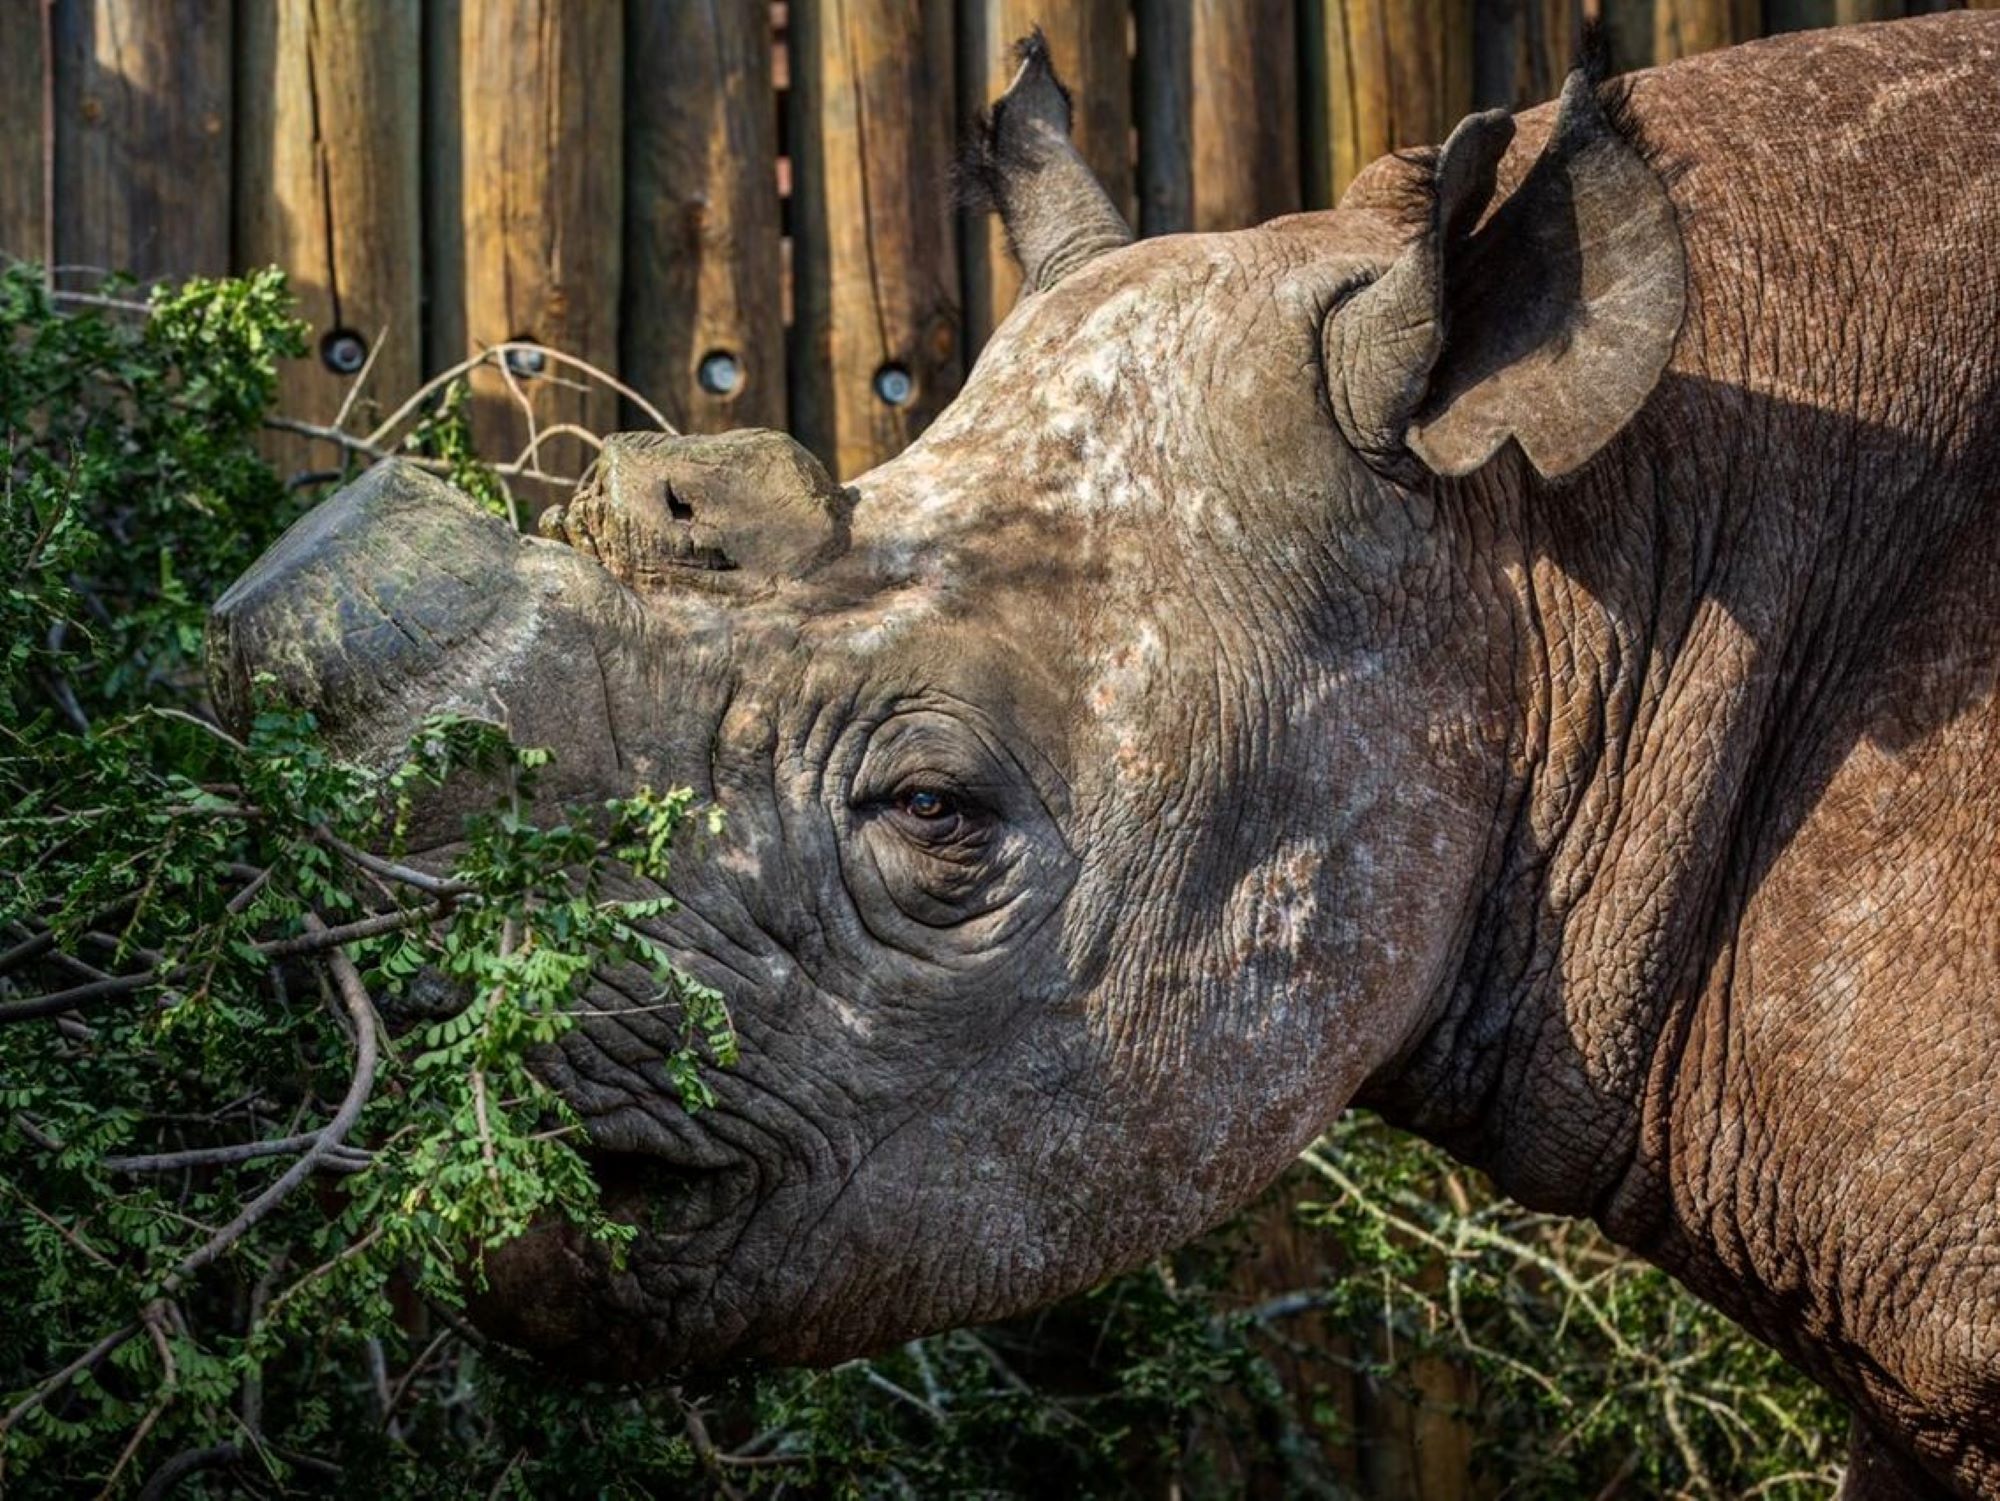 This blind rhino’s infrared security system could help stop poachers